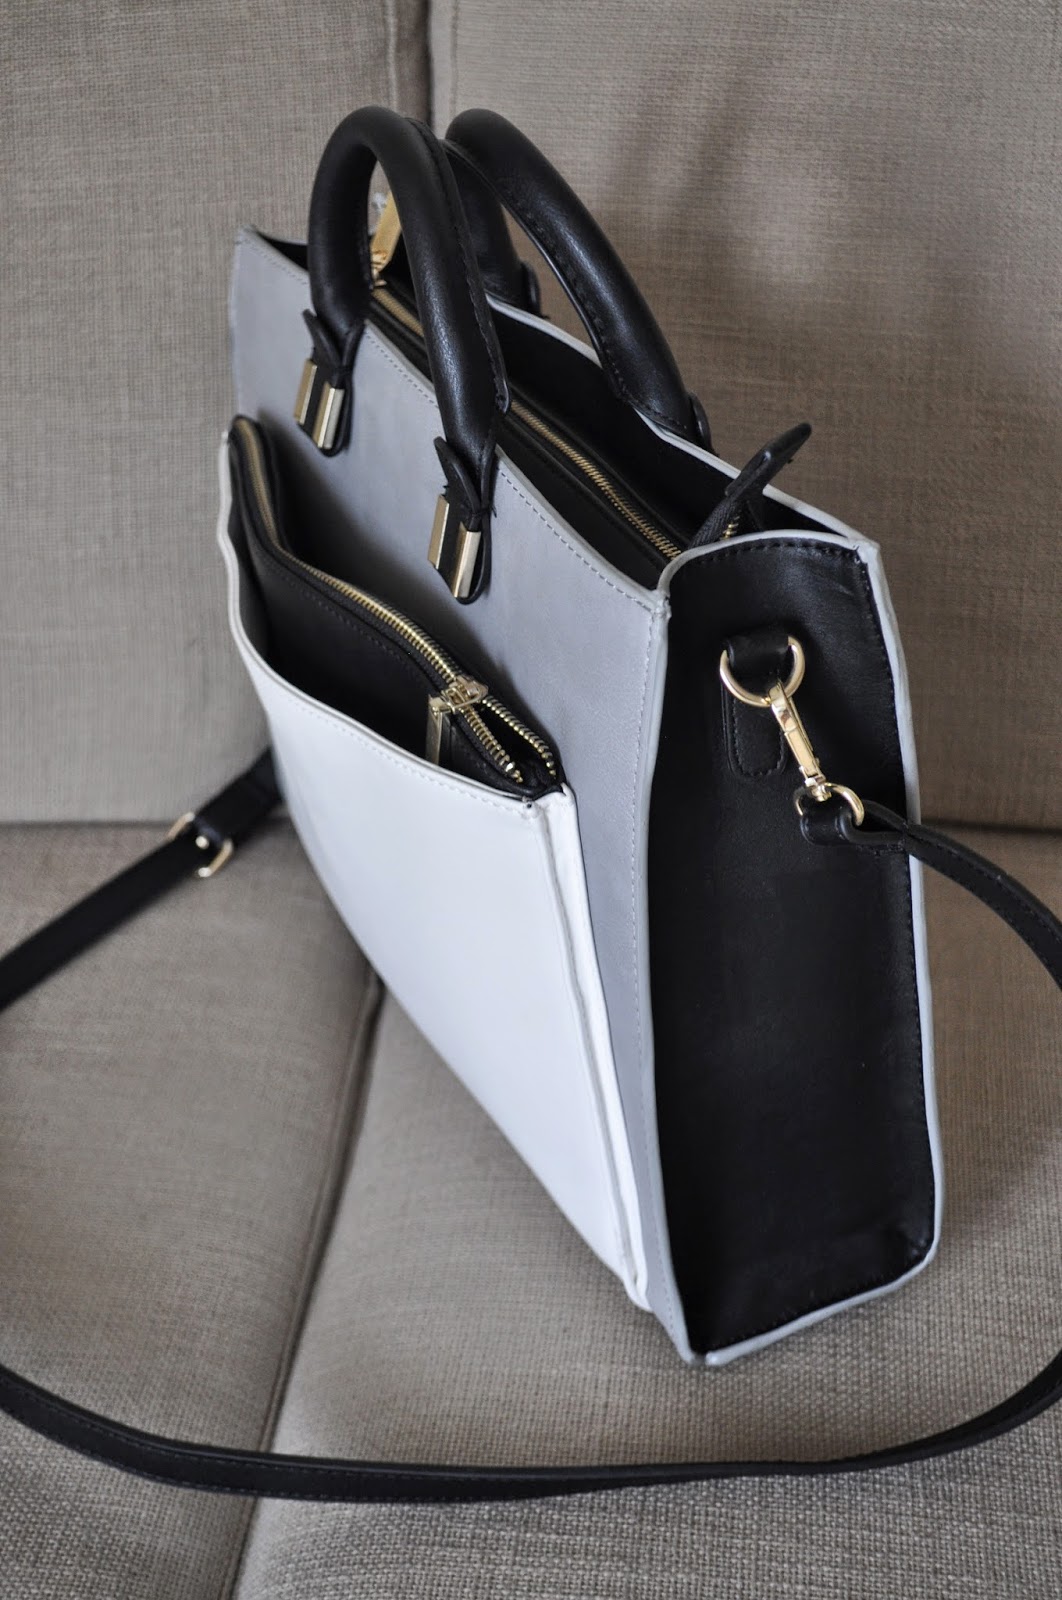 LouLouLoves.: Zara Combined Office City Bag Review  Whats In My Bag!